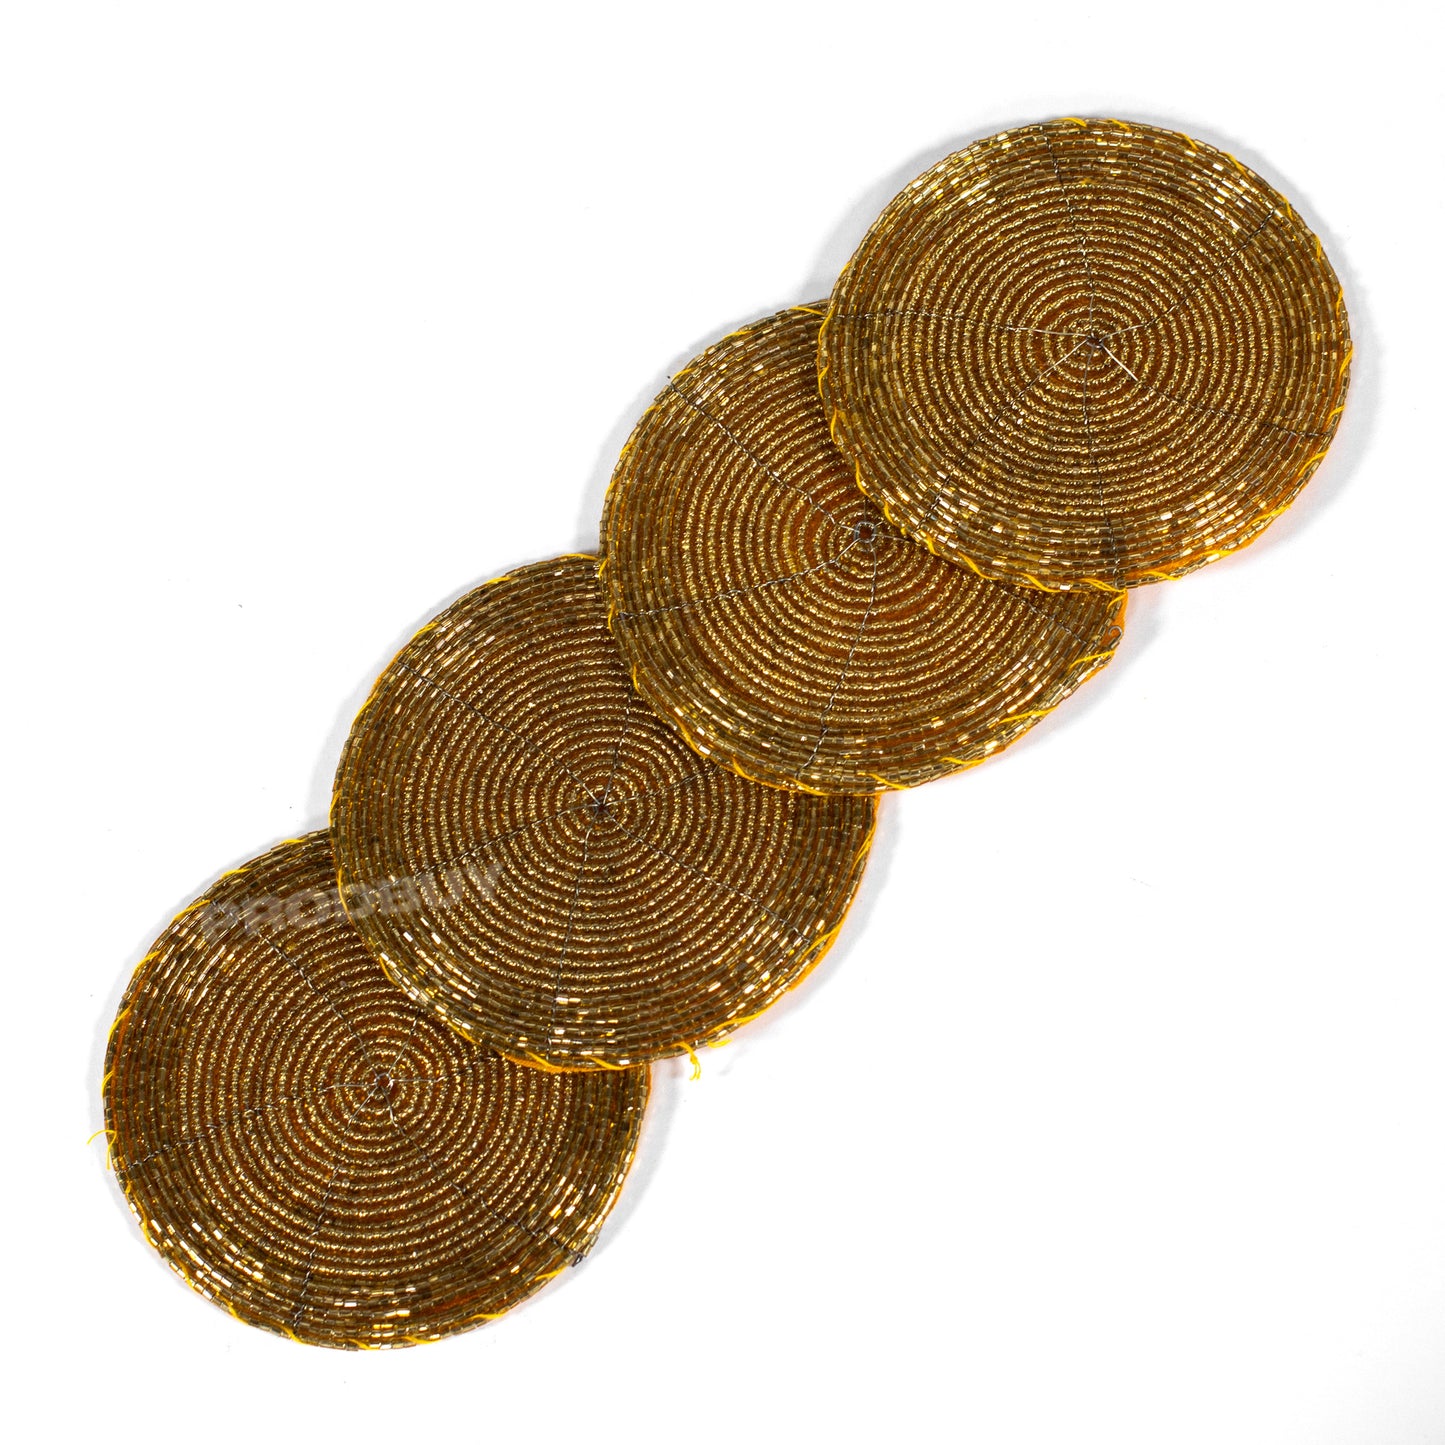 Set of 4 Gold Colour Coasters with Glass Bead & Fabric Design